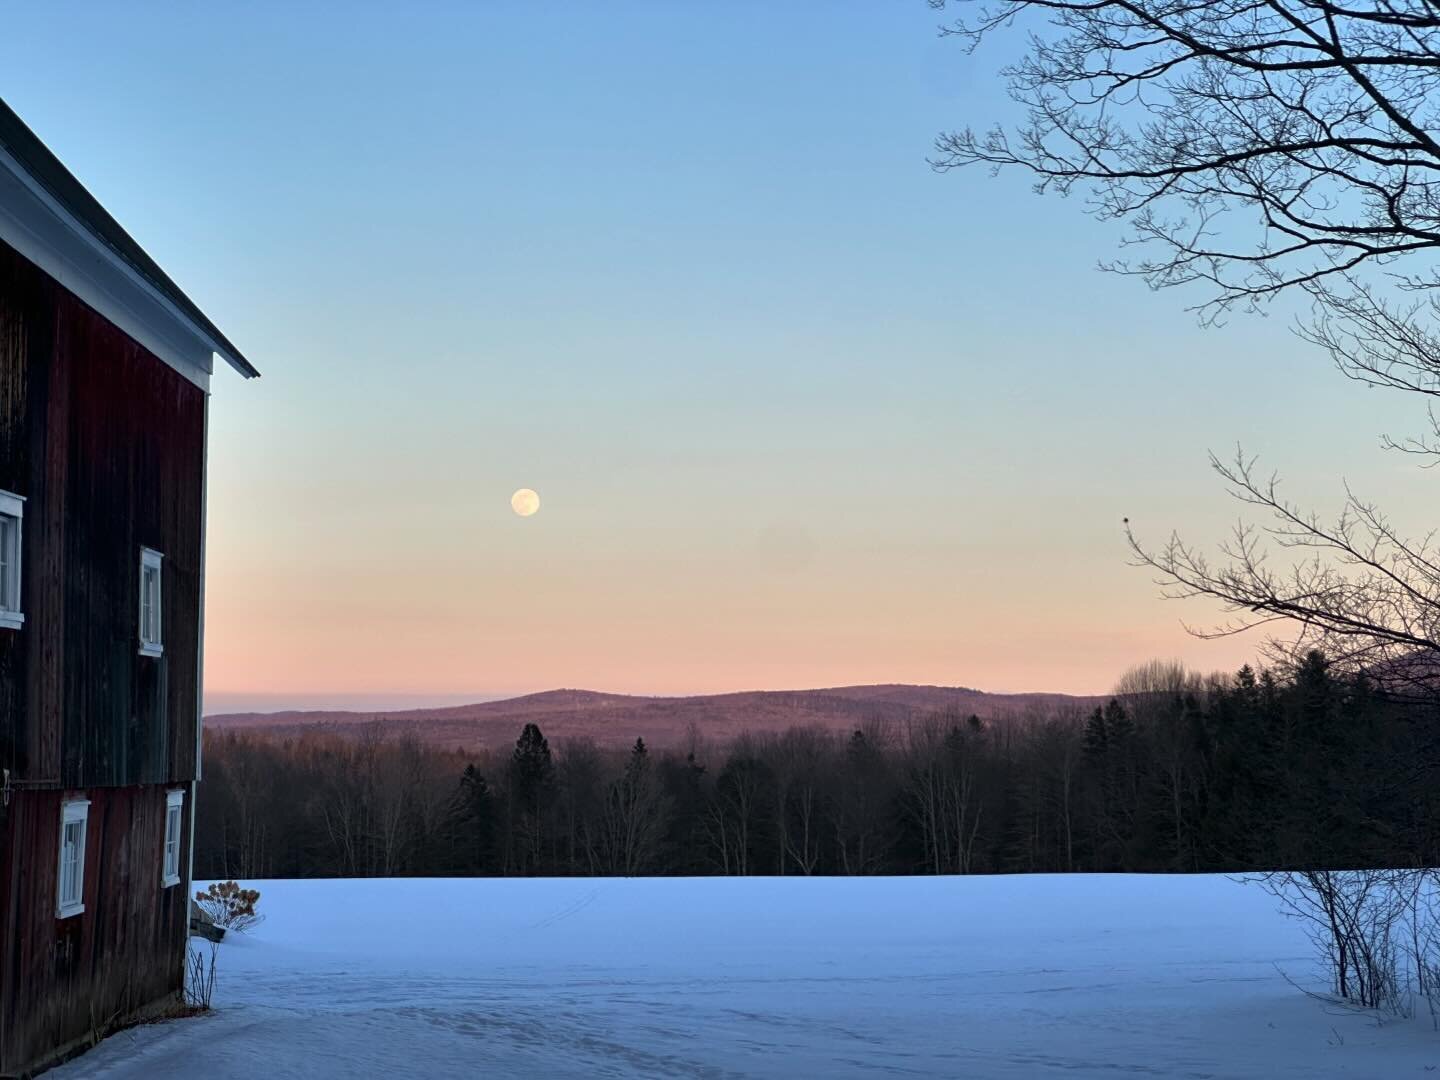 Beautiful moon rising tonight! 

#moonrise #winterscape #barnview #vermontbyvermonters